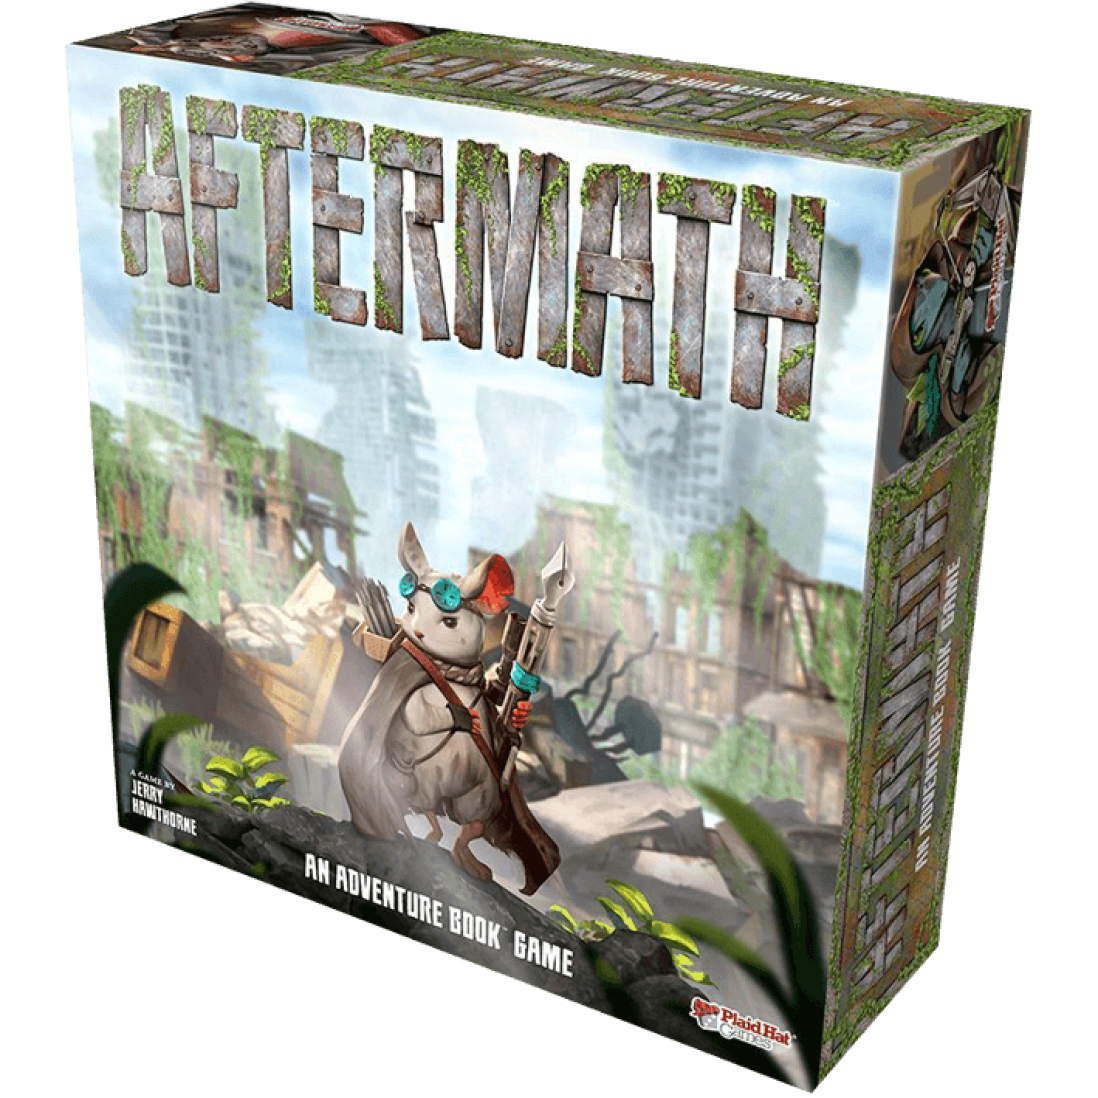 aftermath book